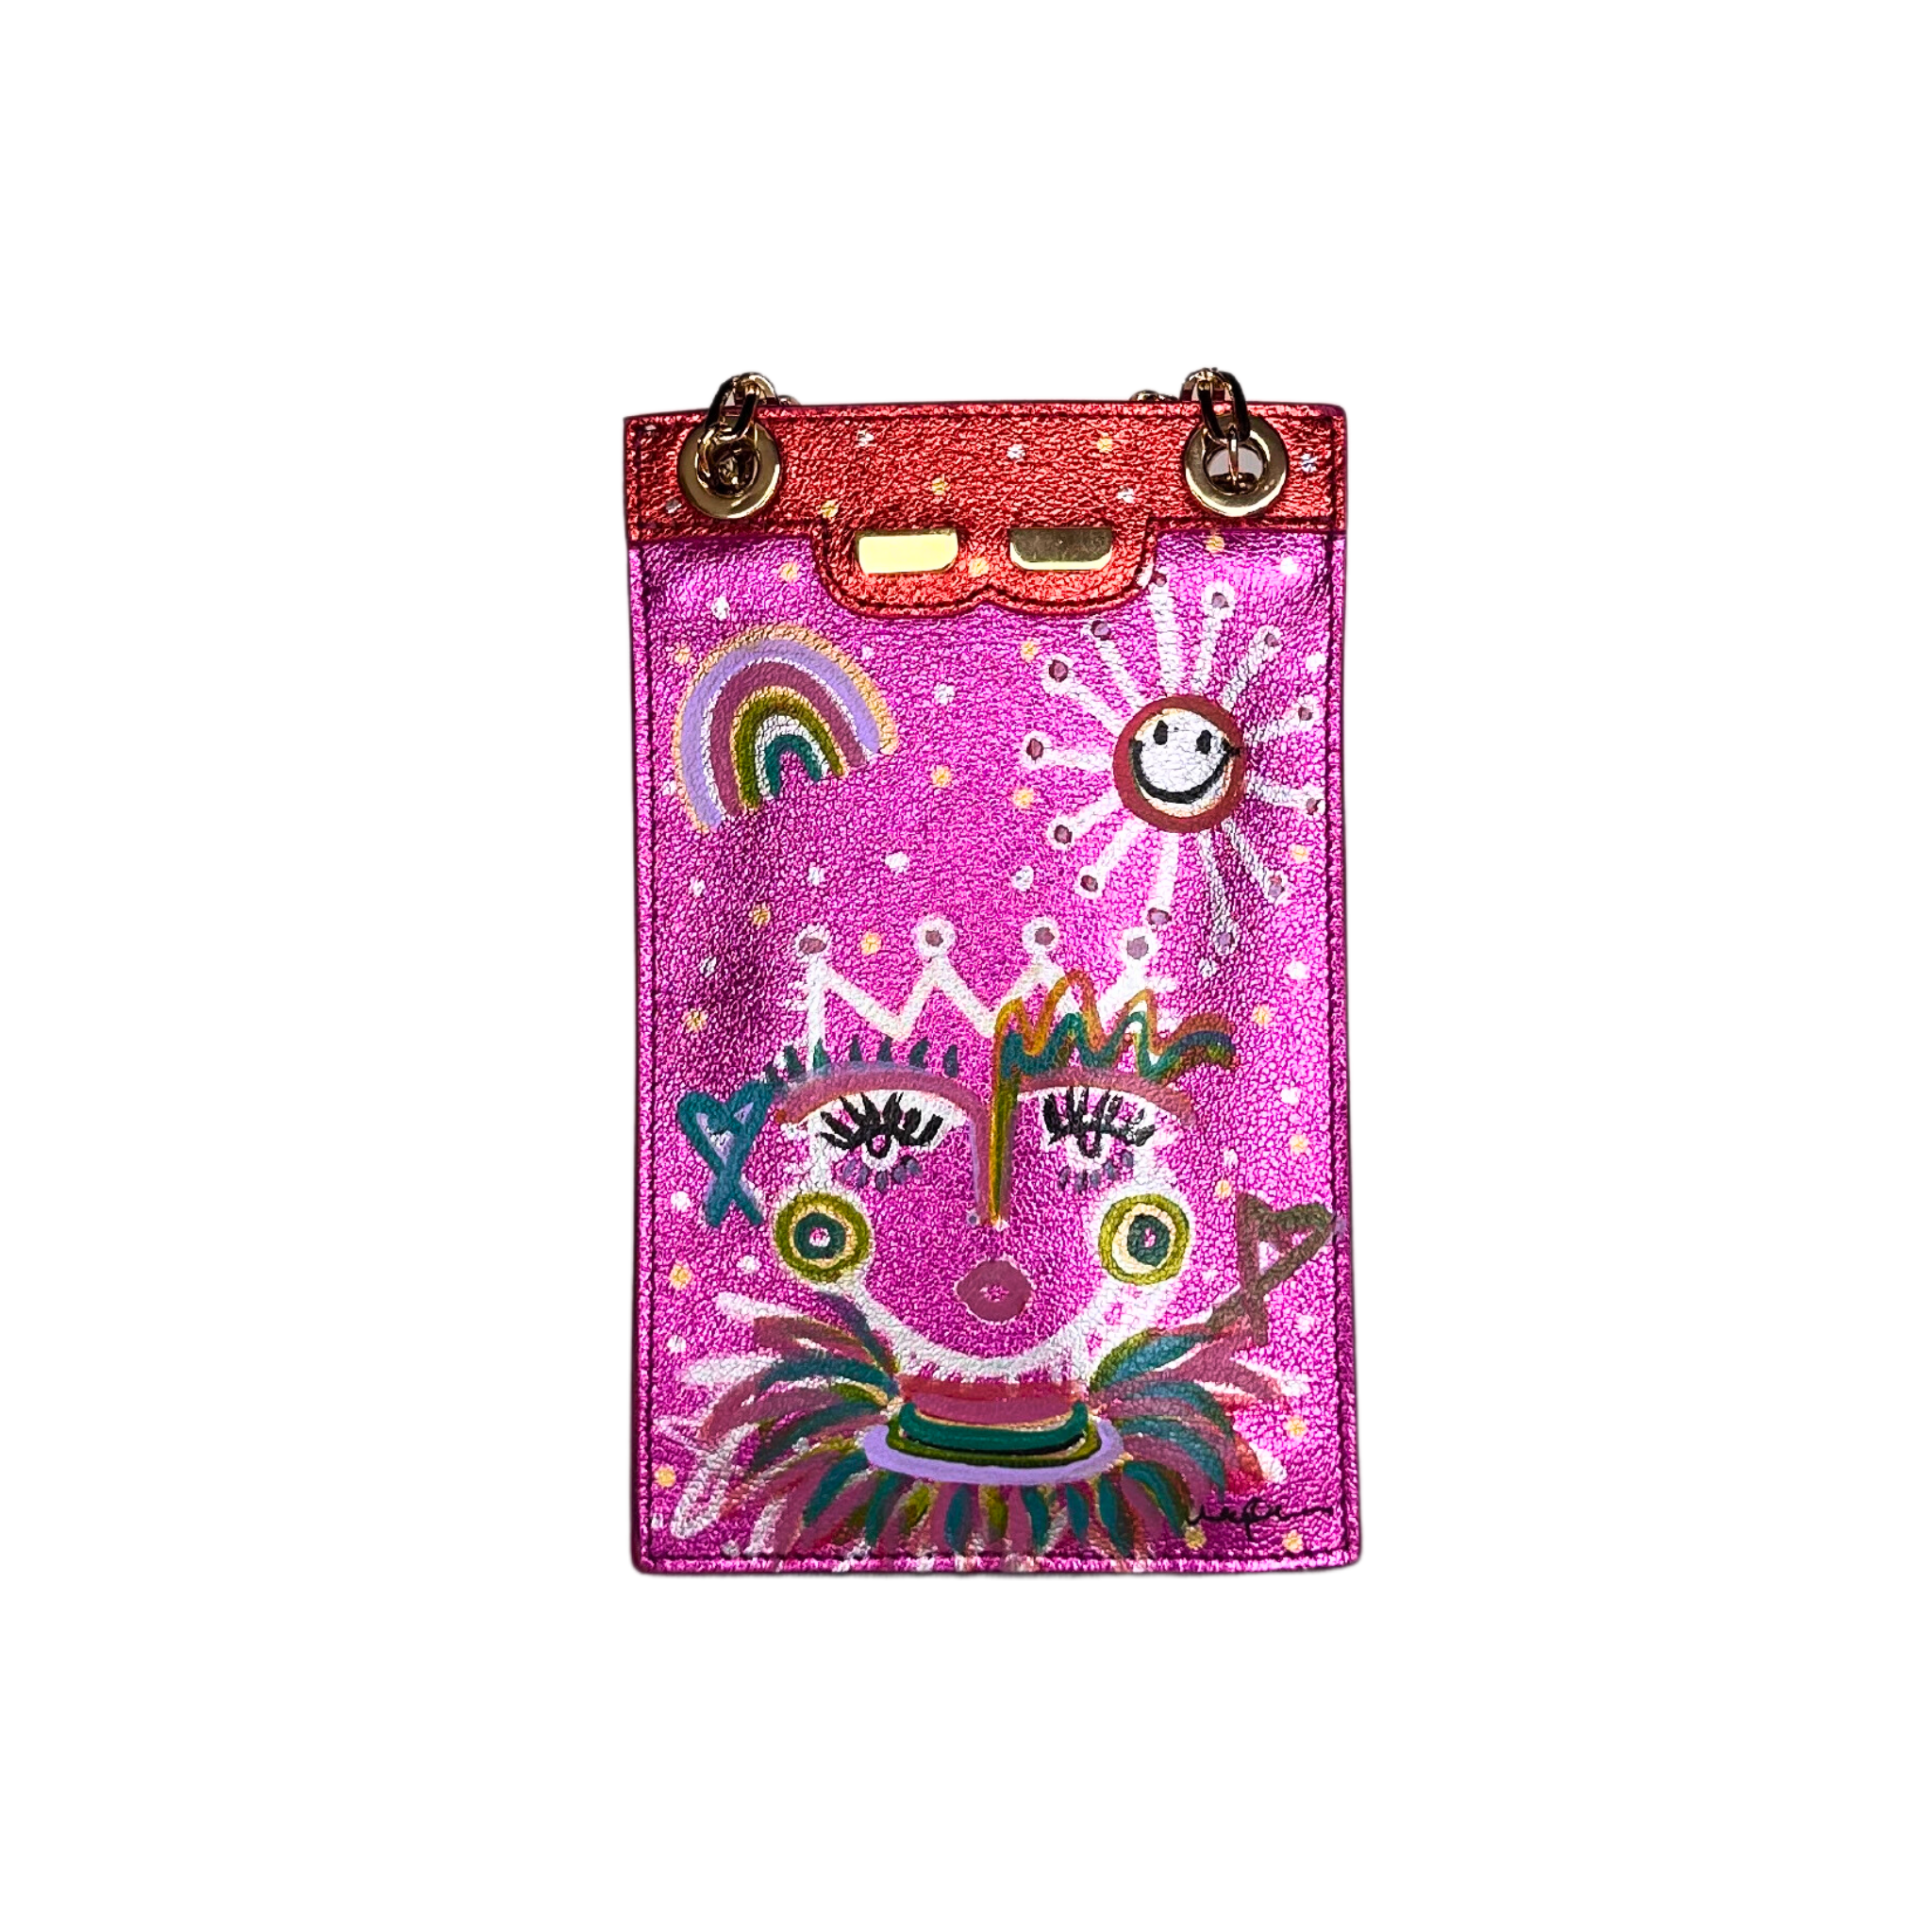 Catherine Cellphone Pouch in Pink and Red Trim